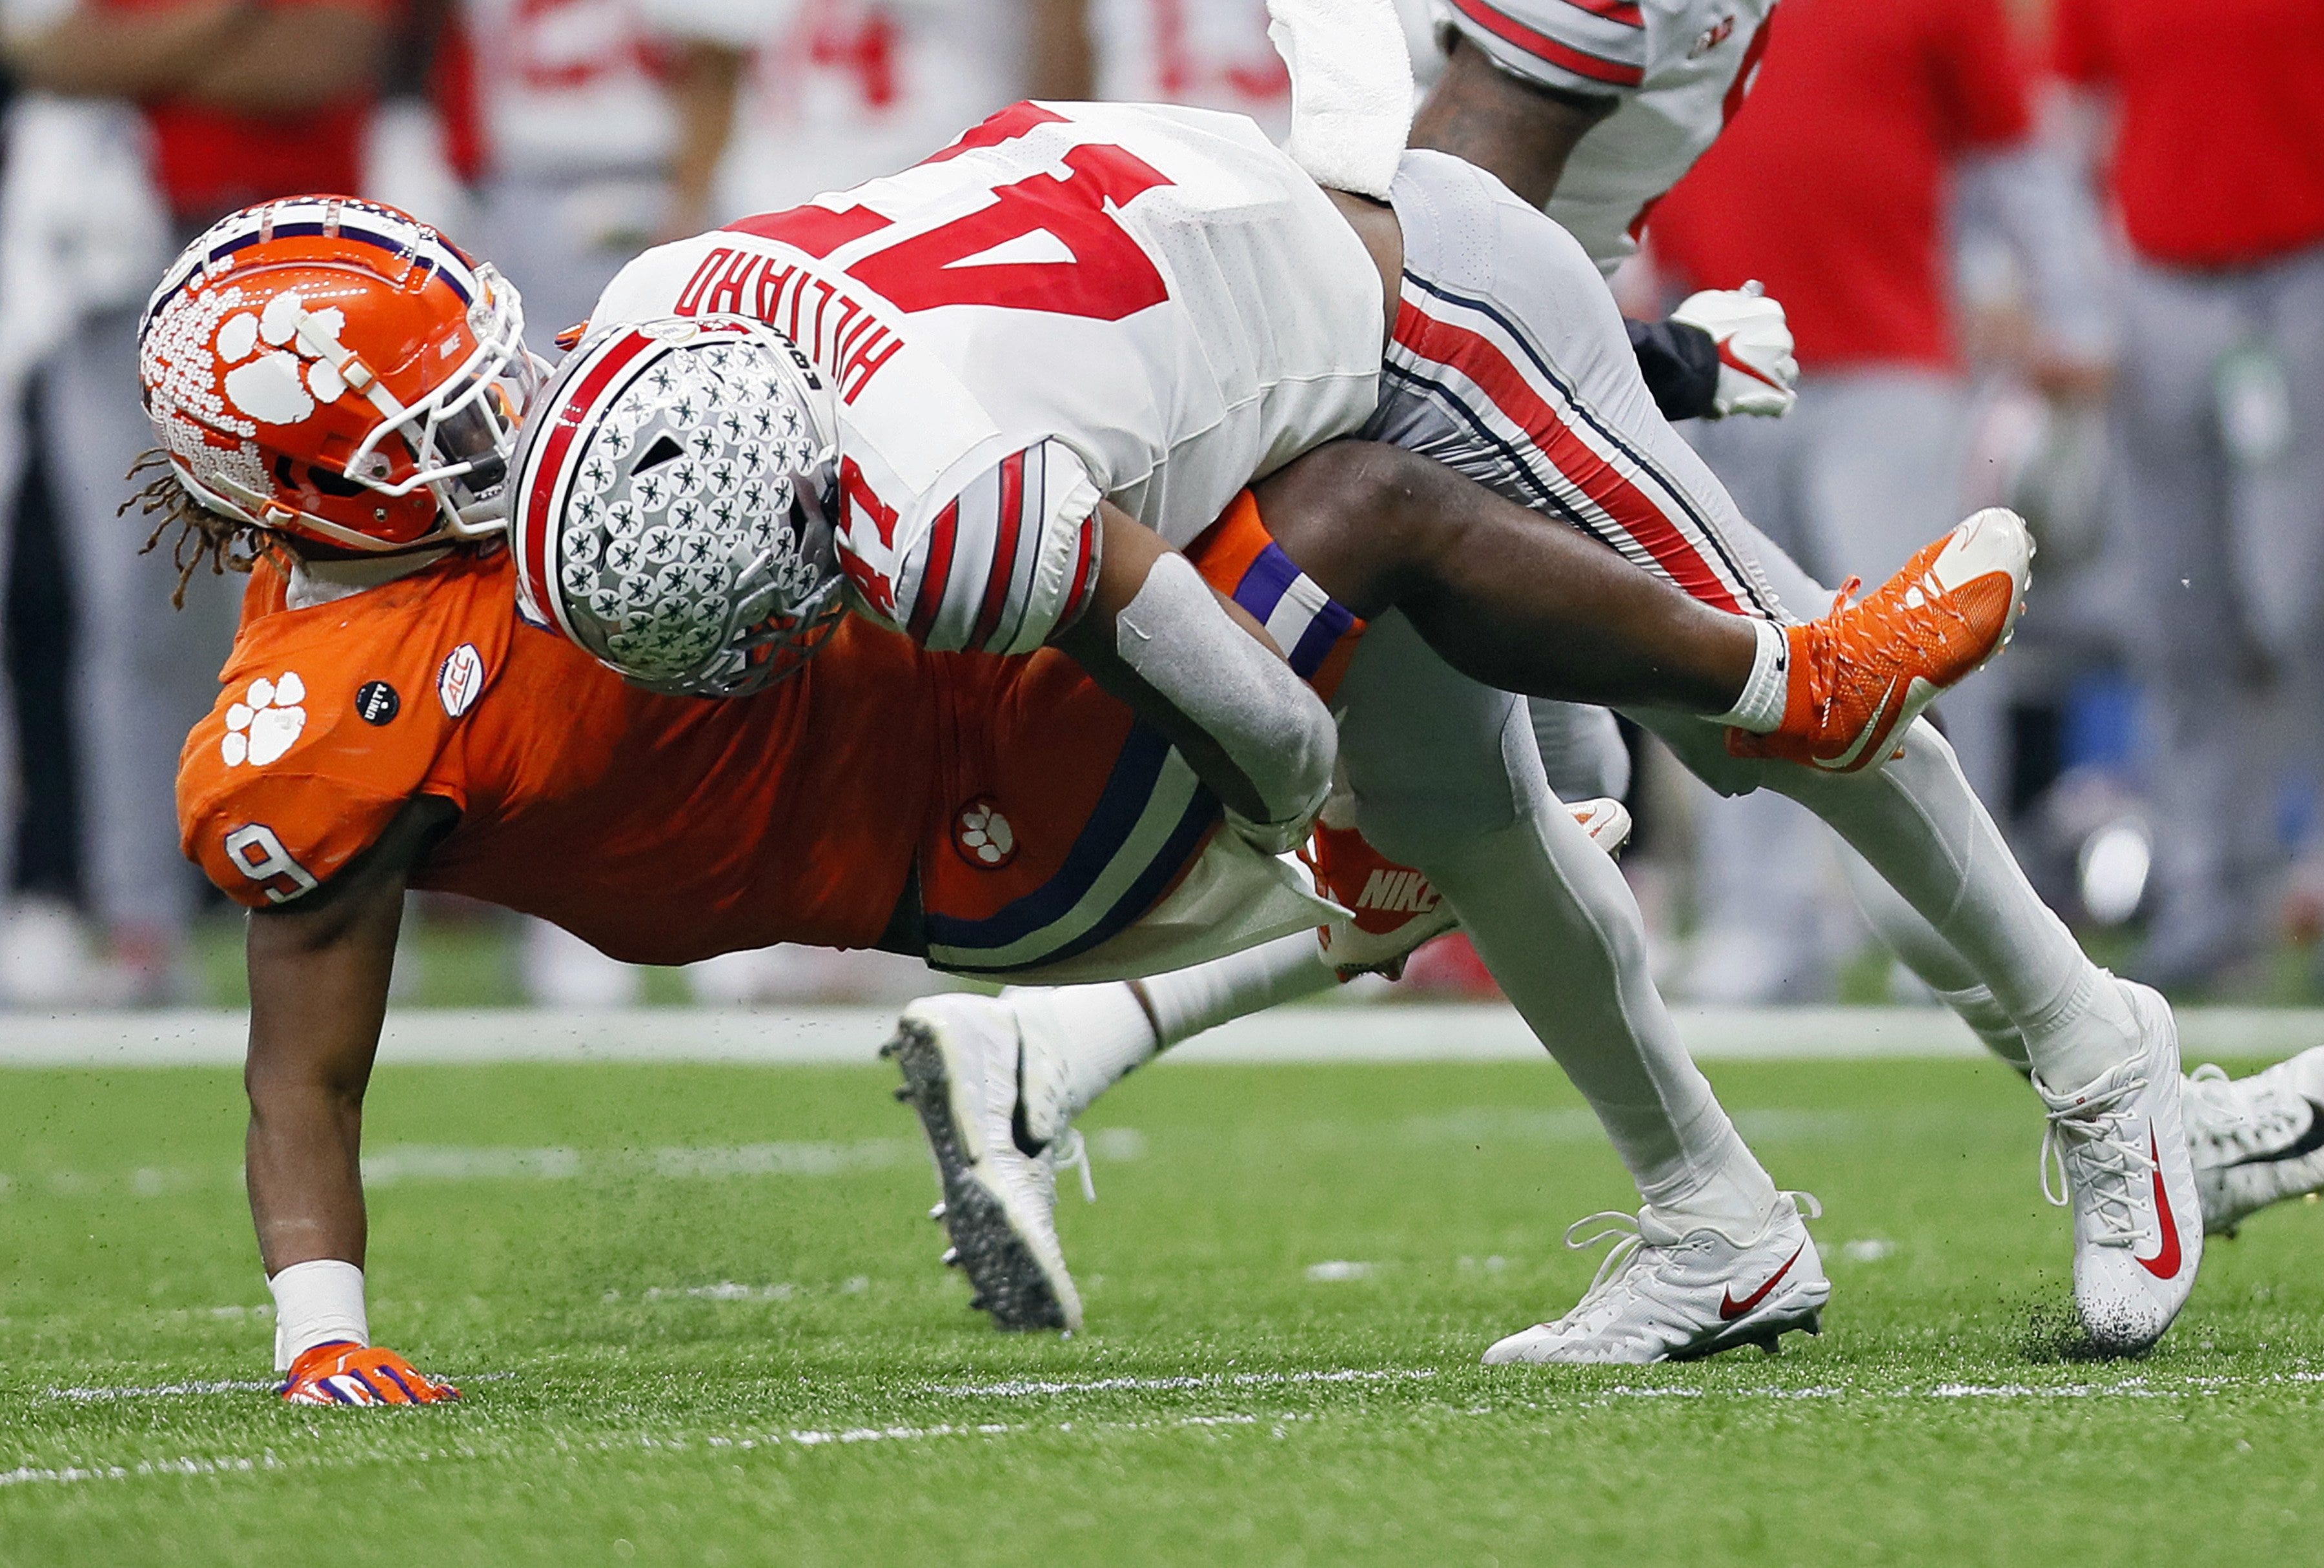 Ohio State football: Perseverance has carried LB Justin Hilliard to final